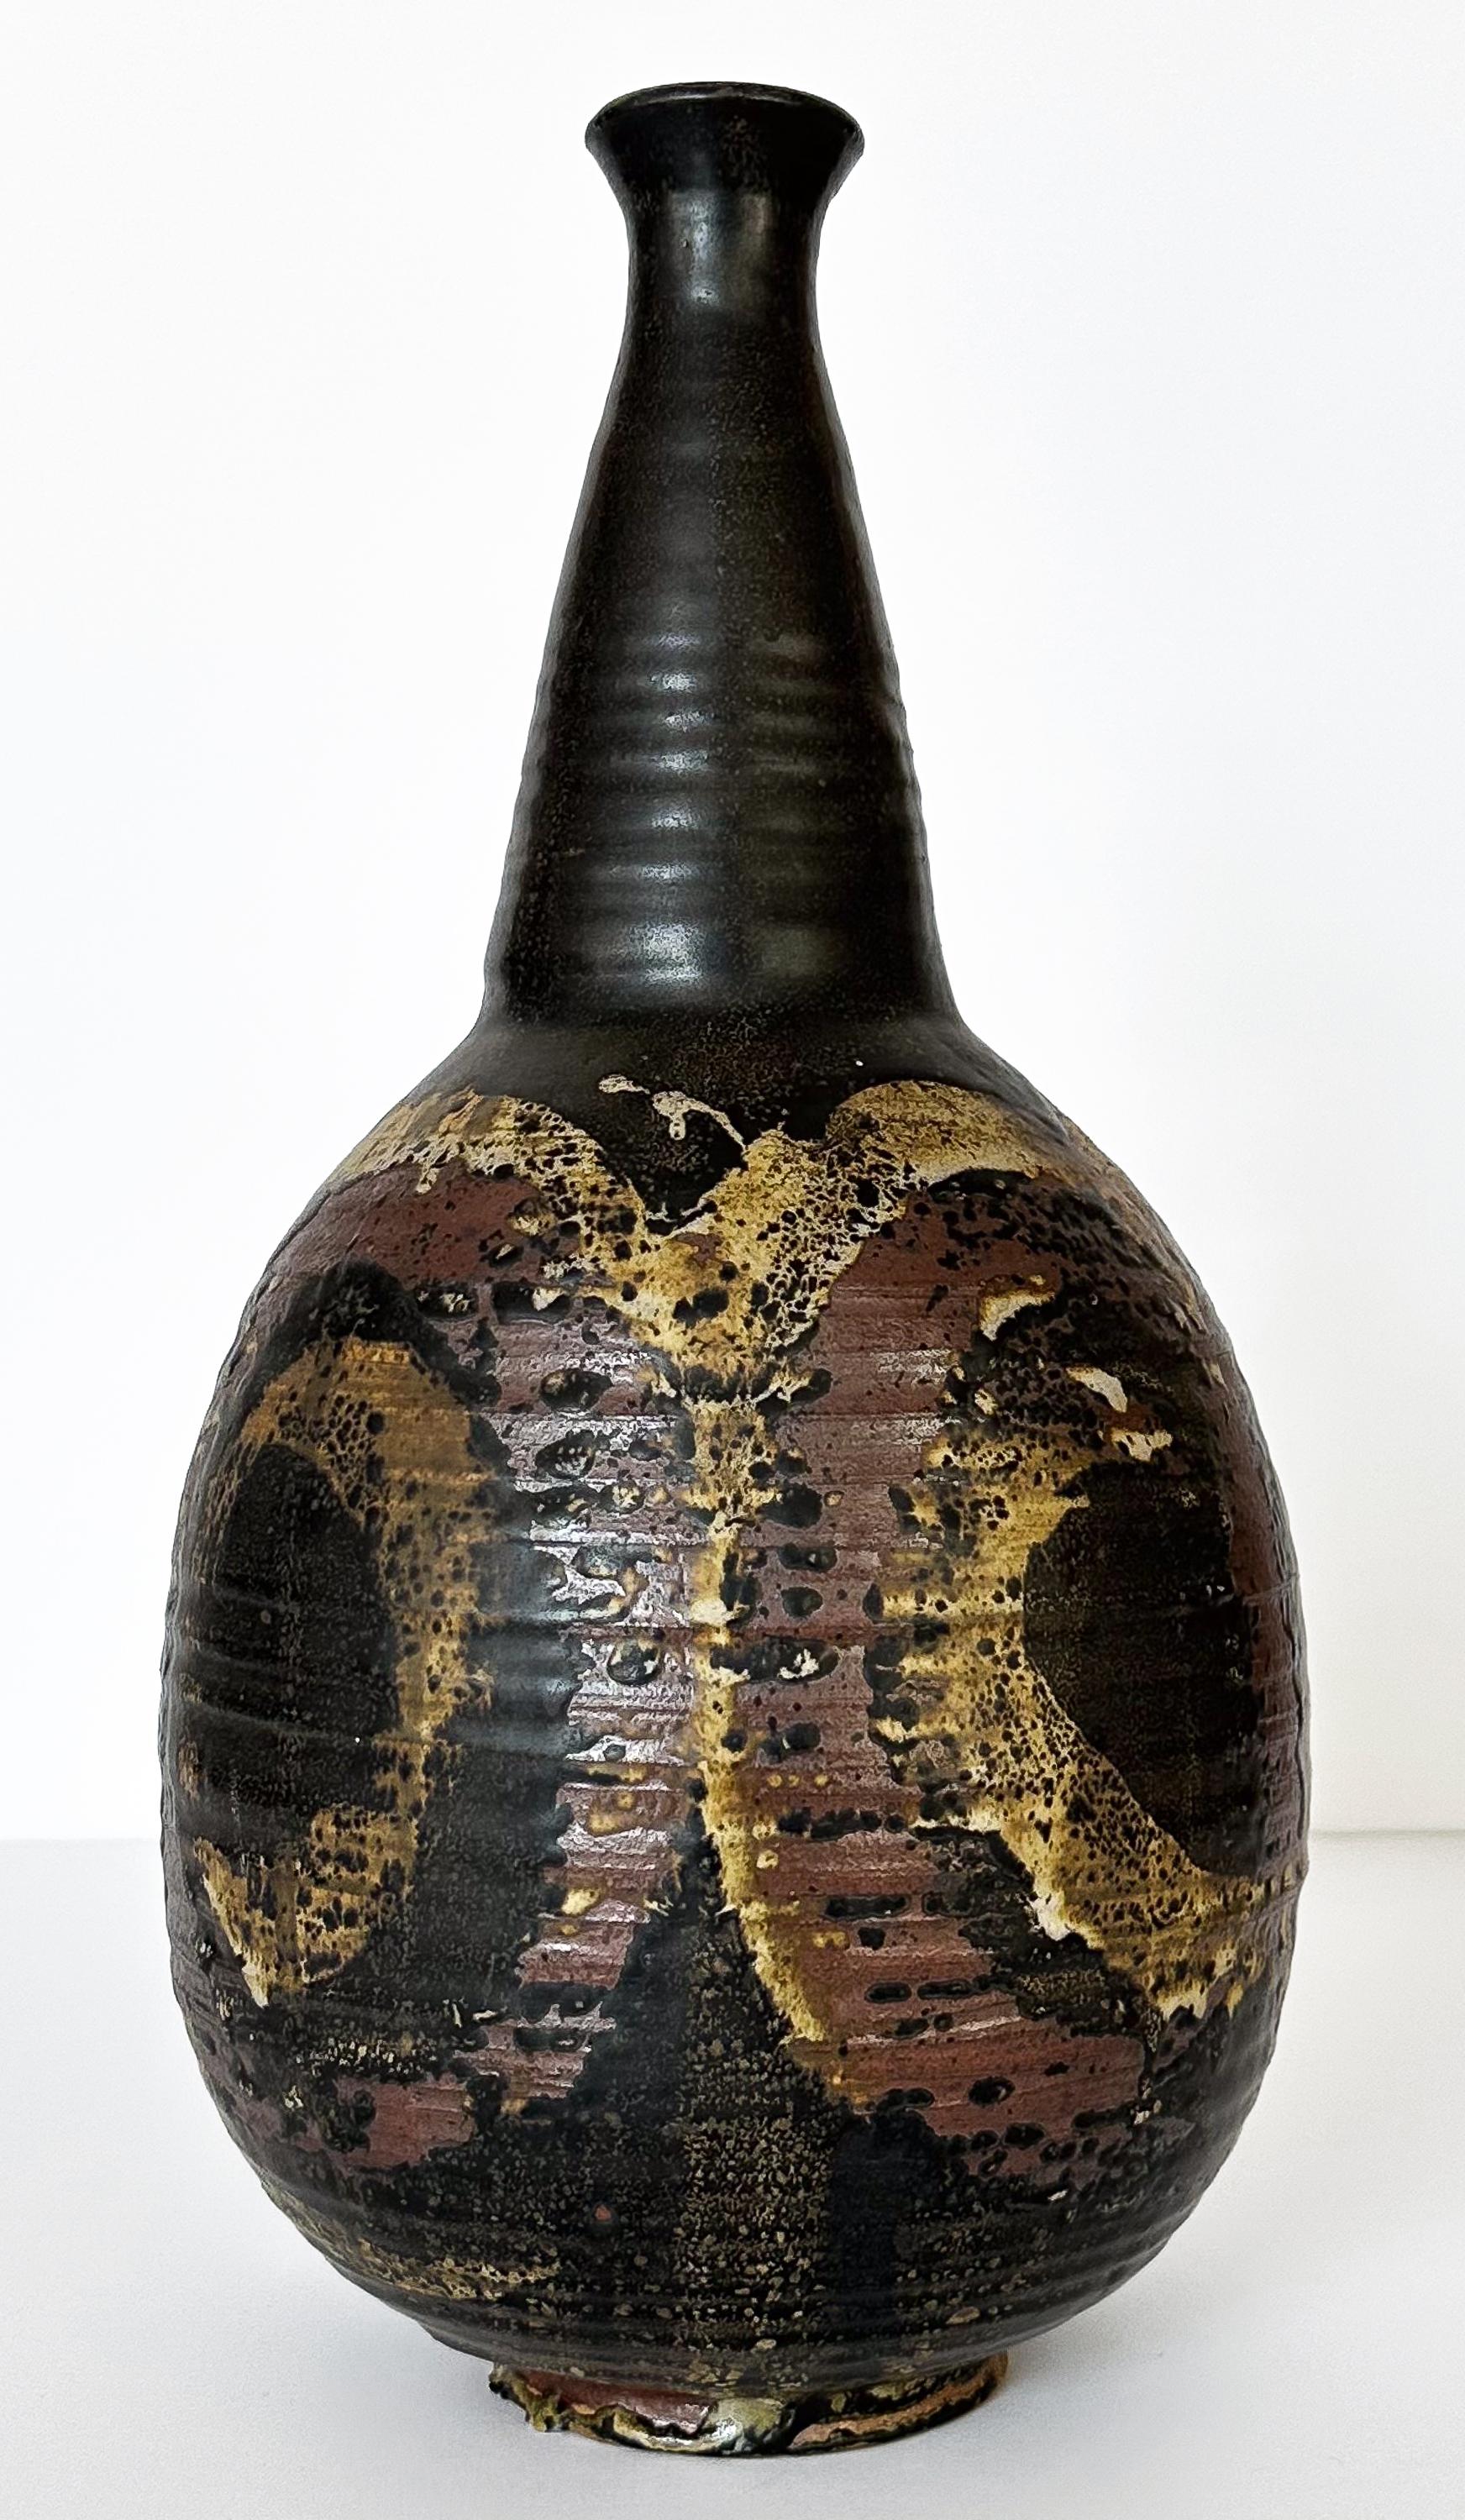 A large studio pottery vase by Laura Vaughn, circa 1960s.  This vase features a dark charcoal background overlaid with brick, tan and ochre glazes in a loose abstract swirling / circular design.  Narrow neck with a 1.75